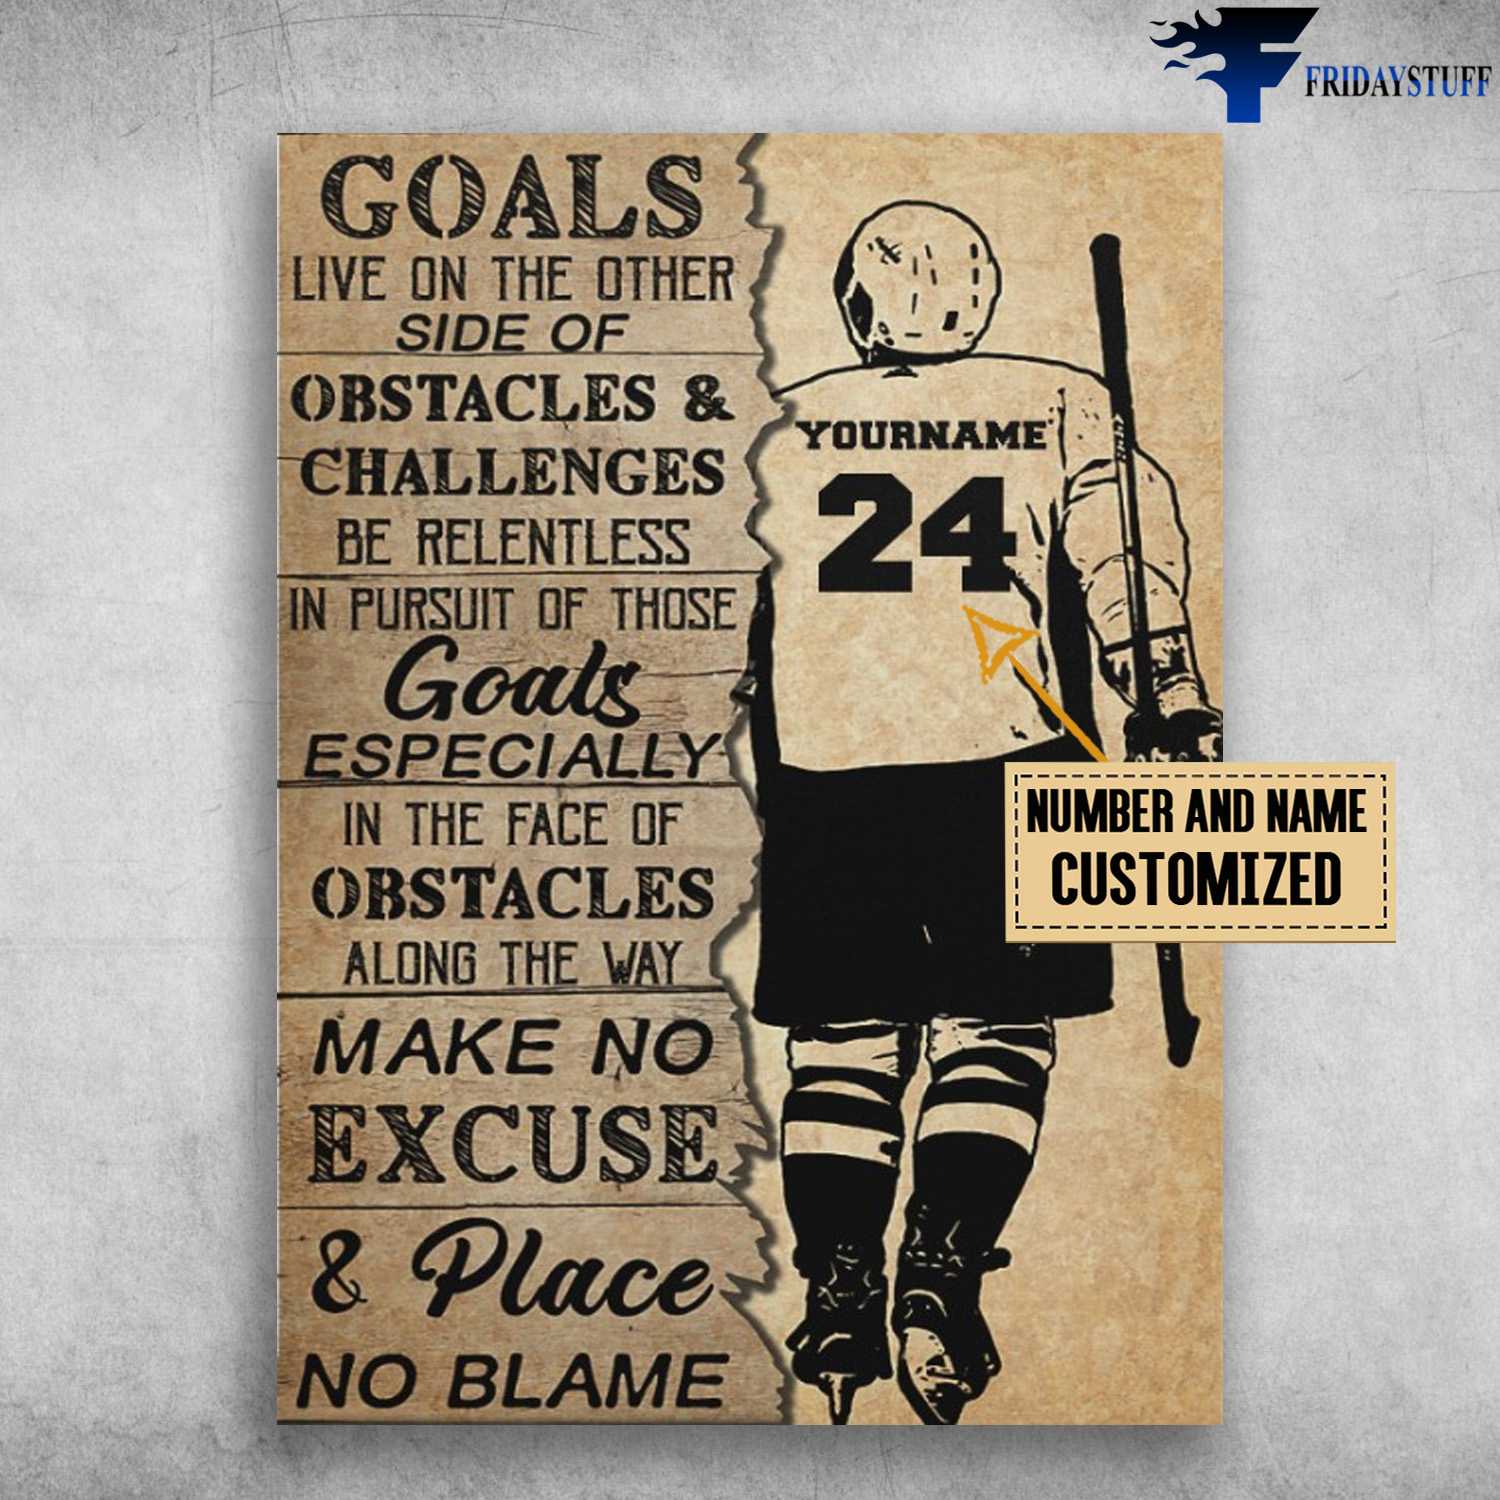 Hockey Player, Ice Hockey Lover, Goals Live On The Other, Side Of Obstacles And Challenges, Be Relentless, In Pursuit Of Those Goals, Especially In The Face Of Obstacles